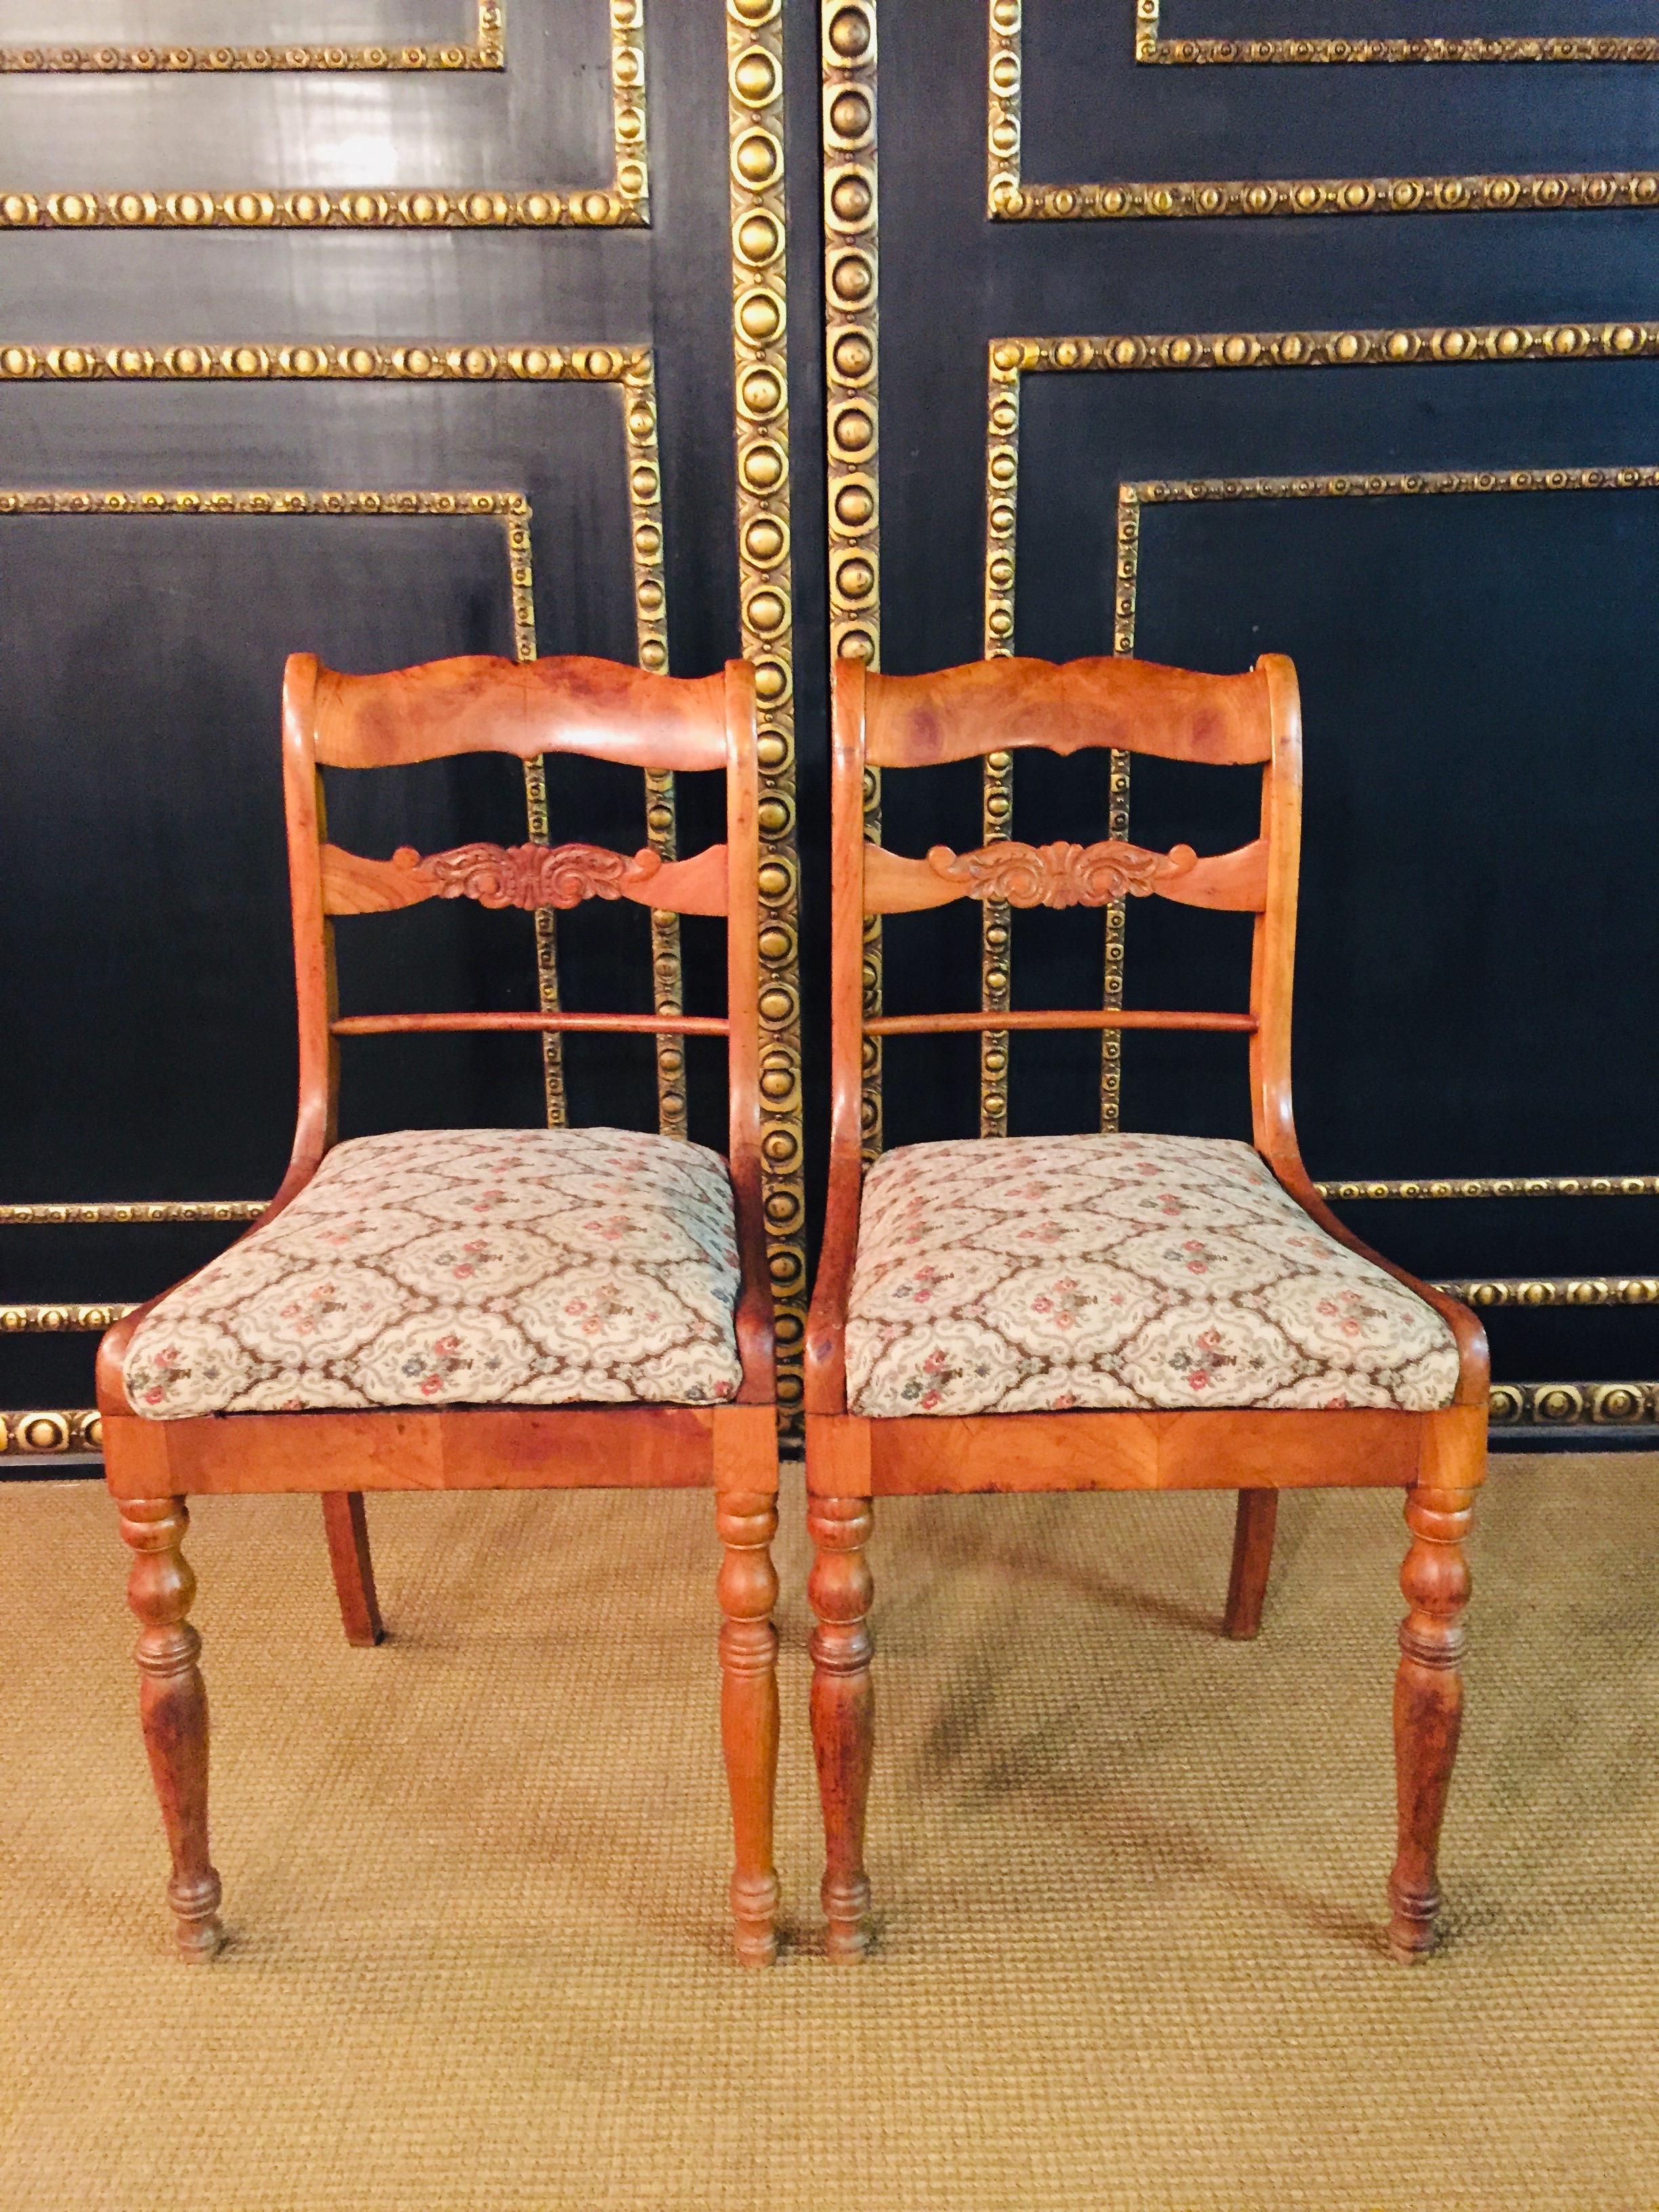 A pair of interesting Biedermeier chairs, circa 1840
Cherry tree, straight frame on flared, ball-shaped legs. Rectangular backrest frame with finely curved end and corresponding center bar. Seat padded with removable seat.
A good historical